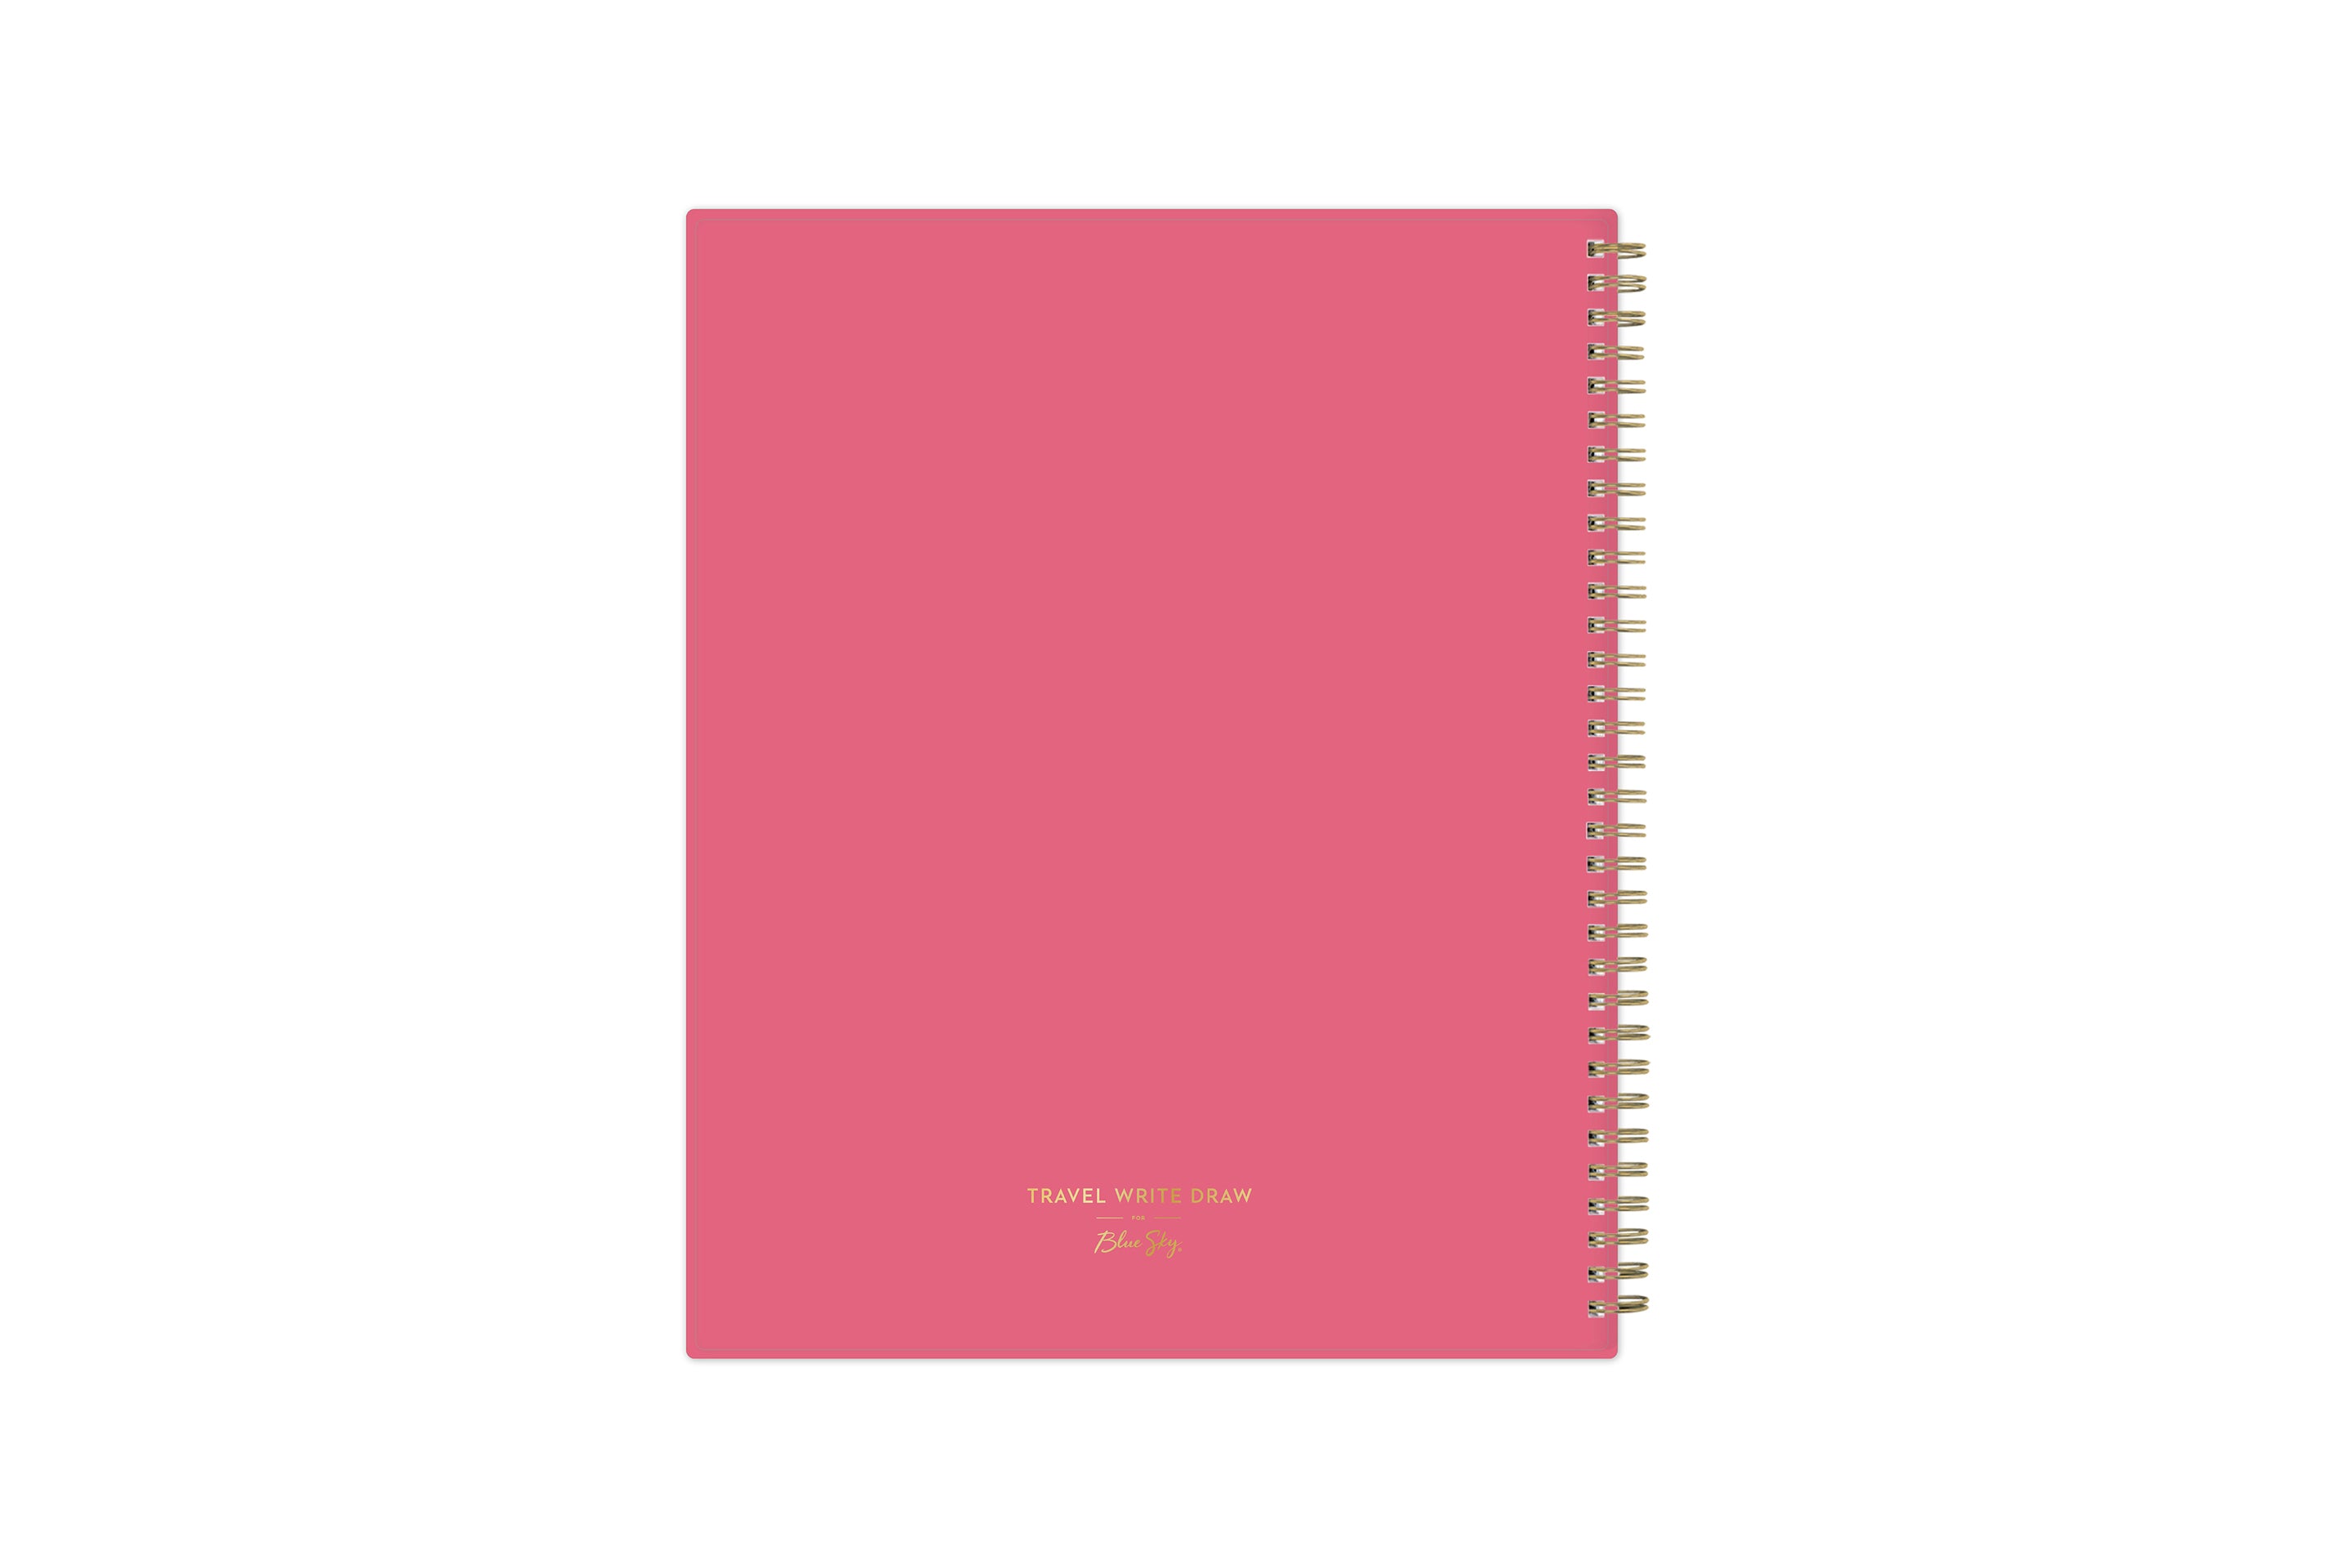 rose pink back cover in 8.5x11 planner size and gold wire o binding